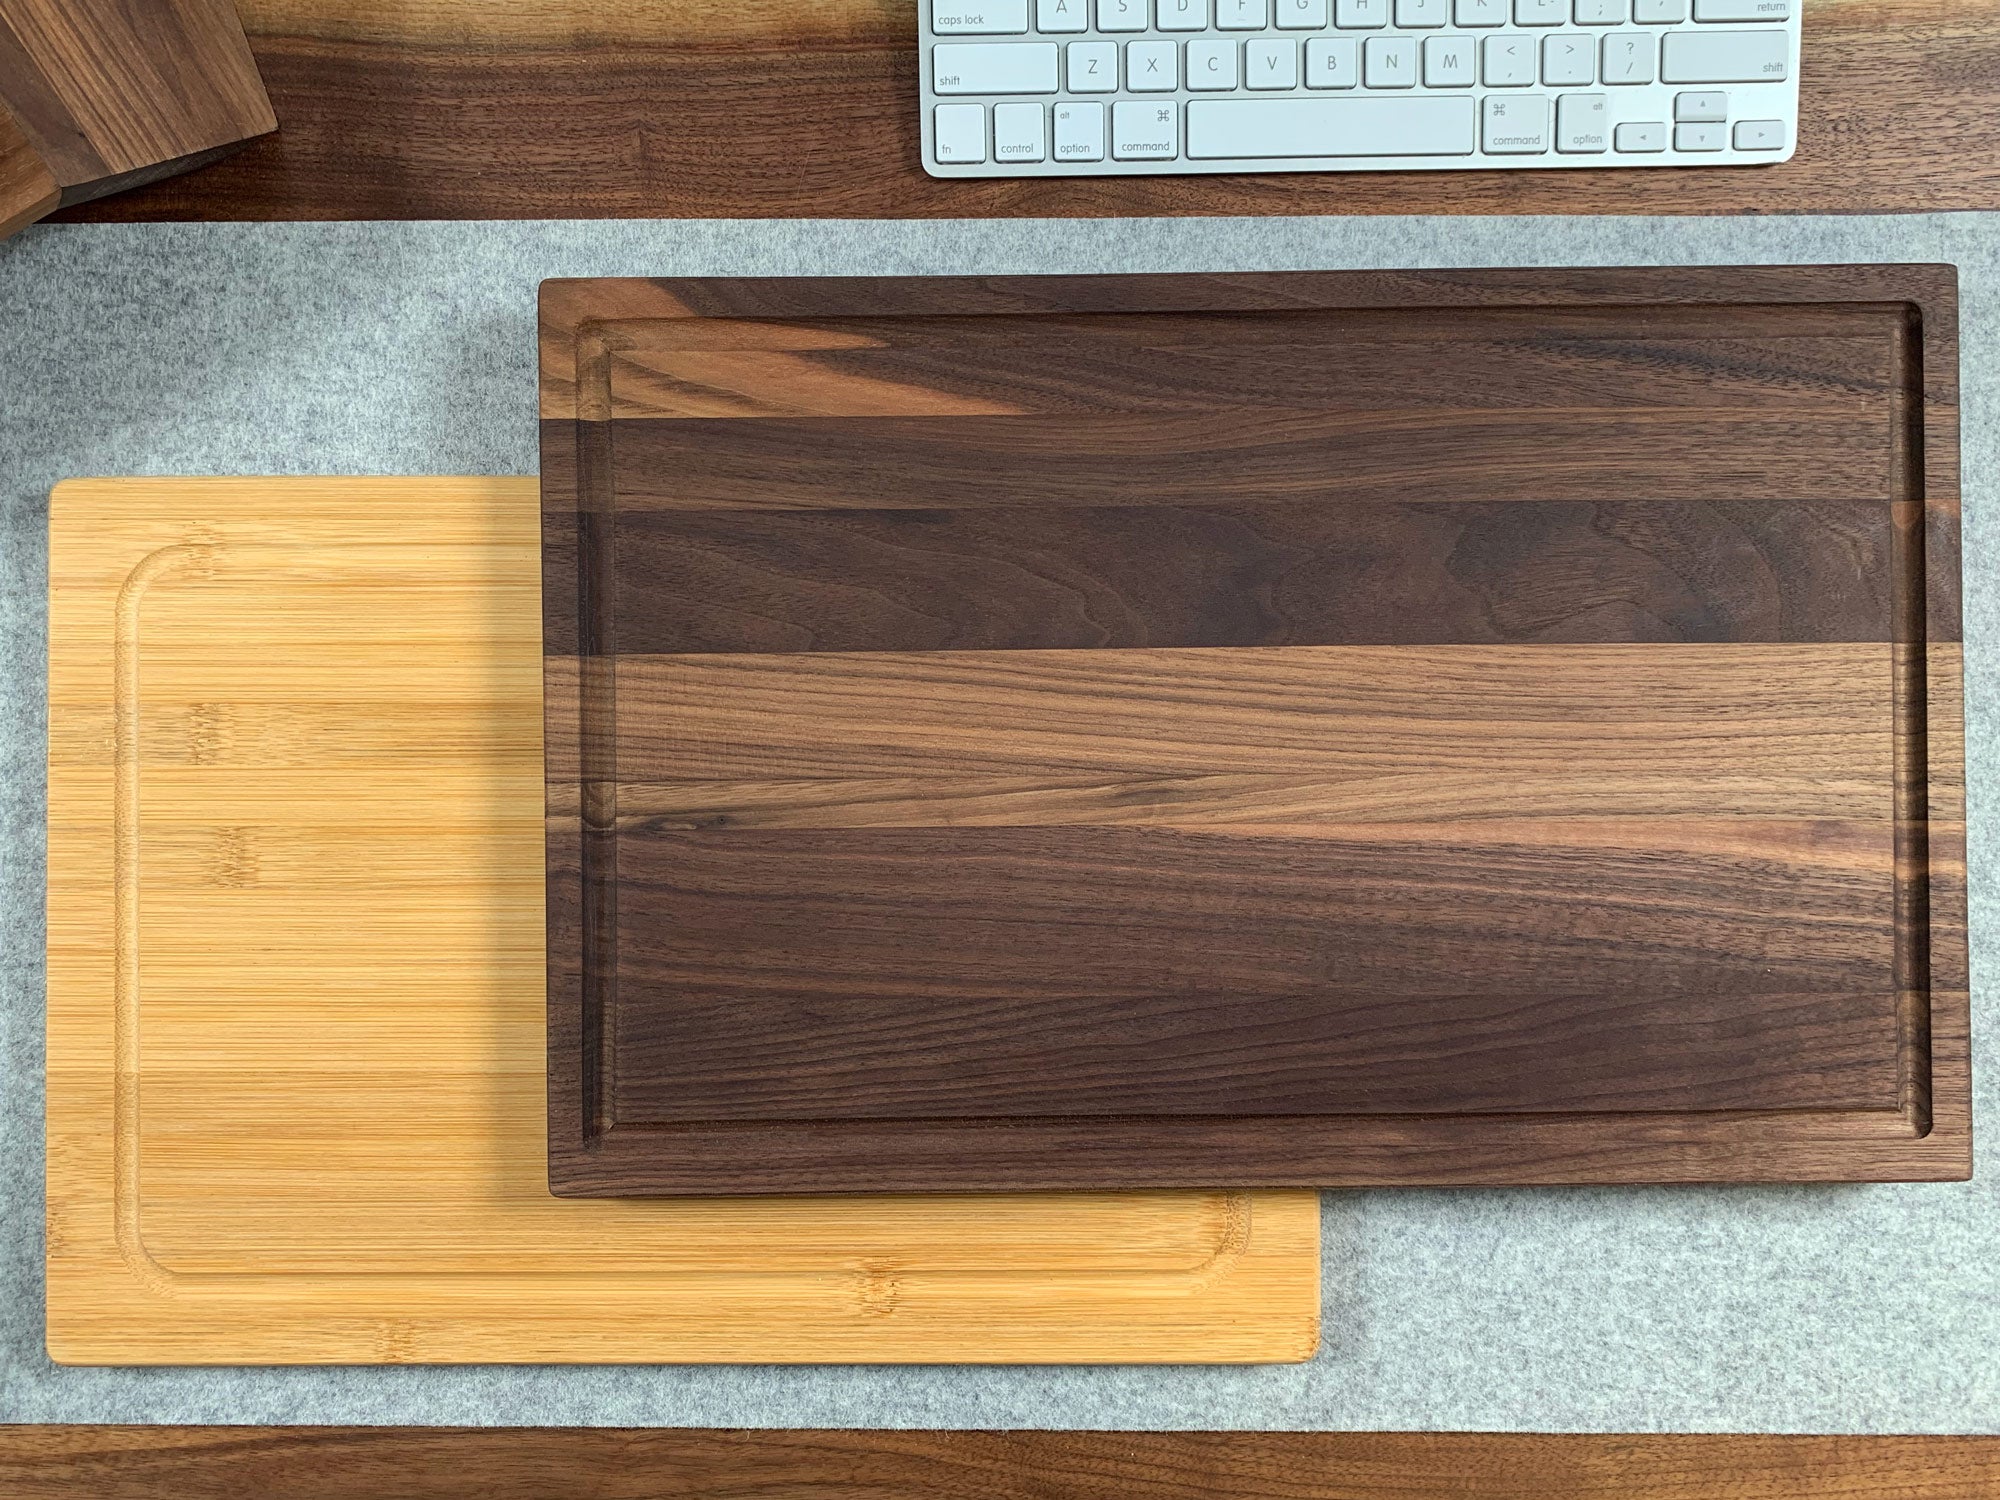 The Bamboo Land Bamboo Cutting Board Is Popular on